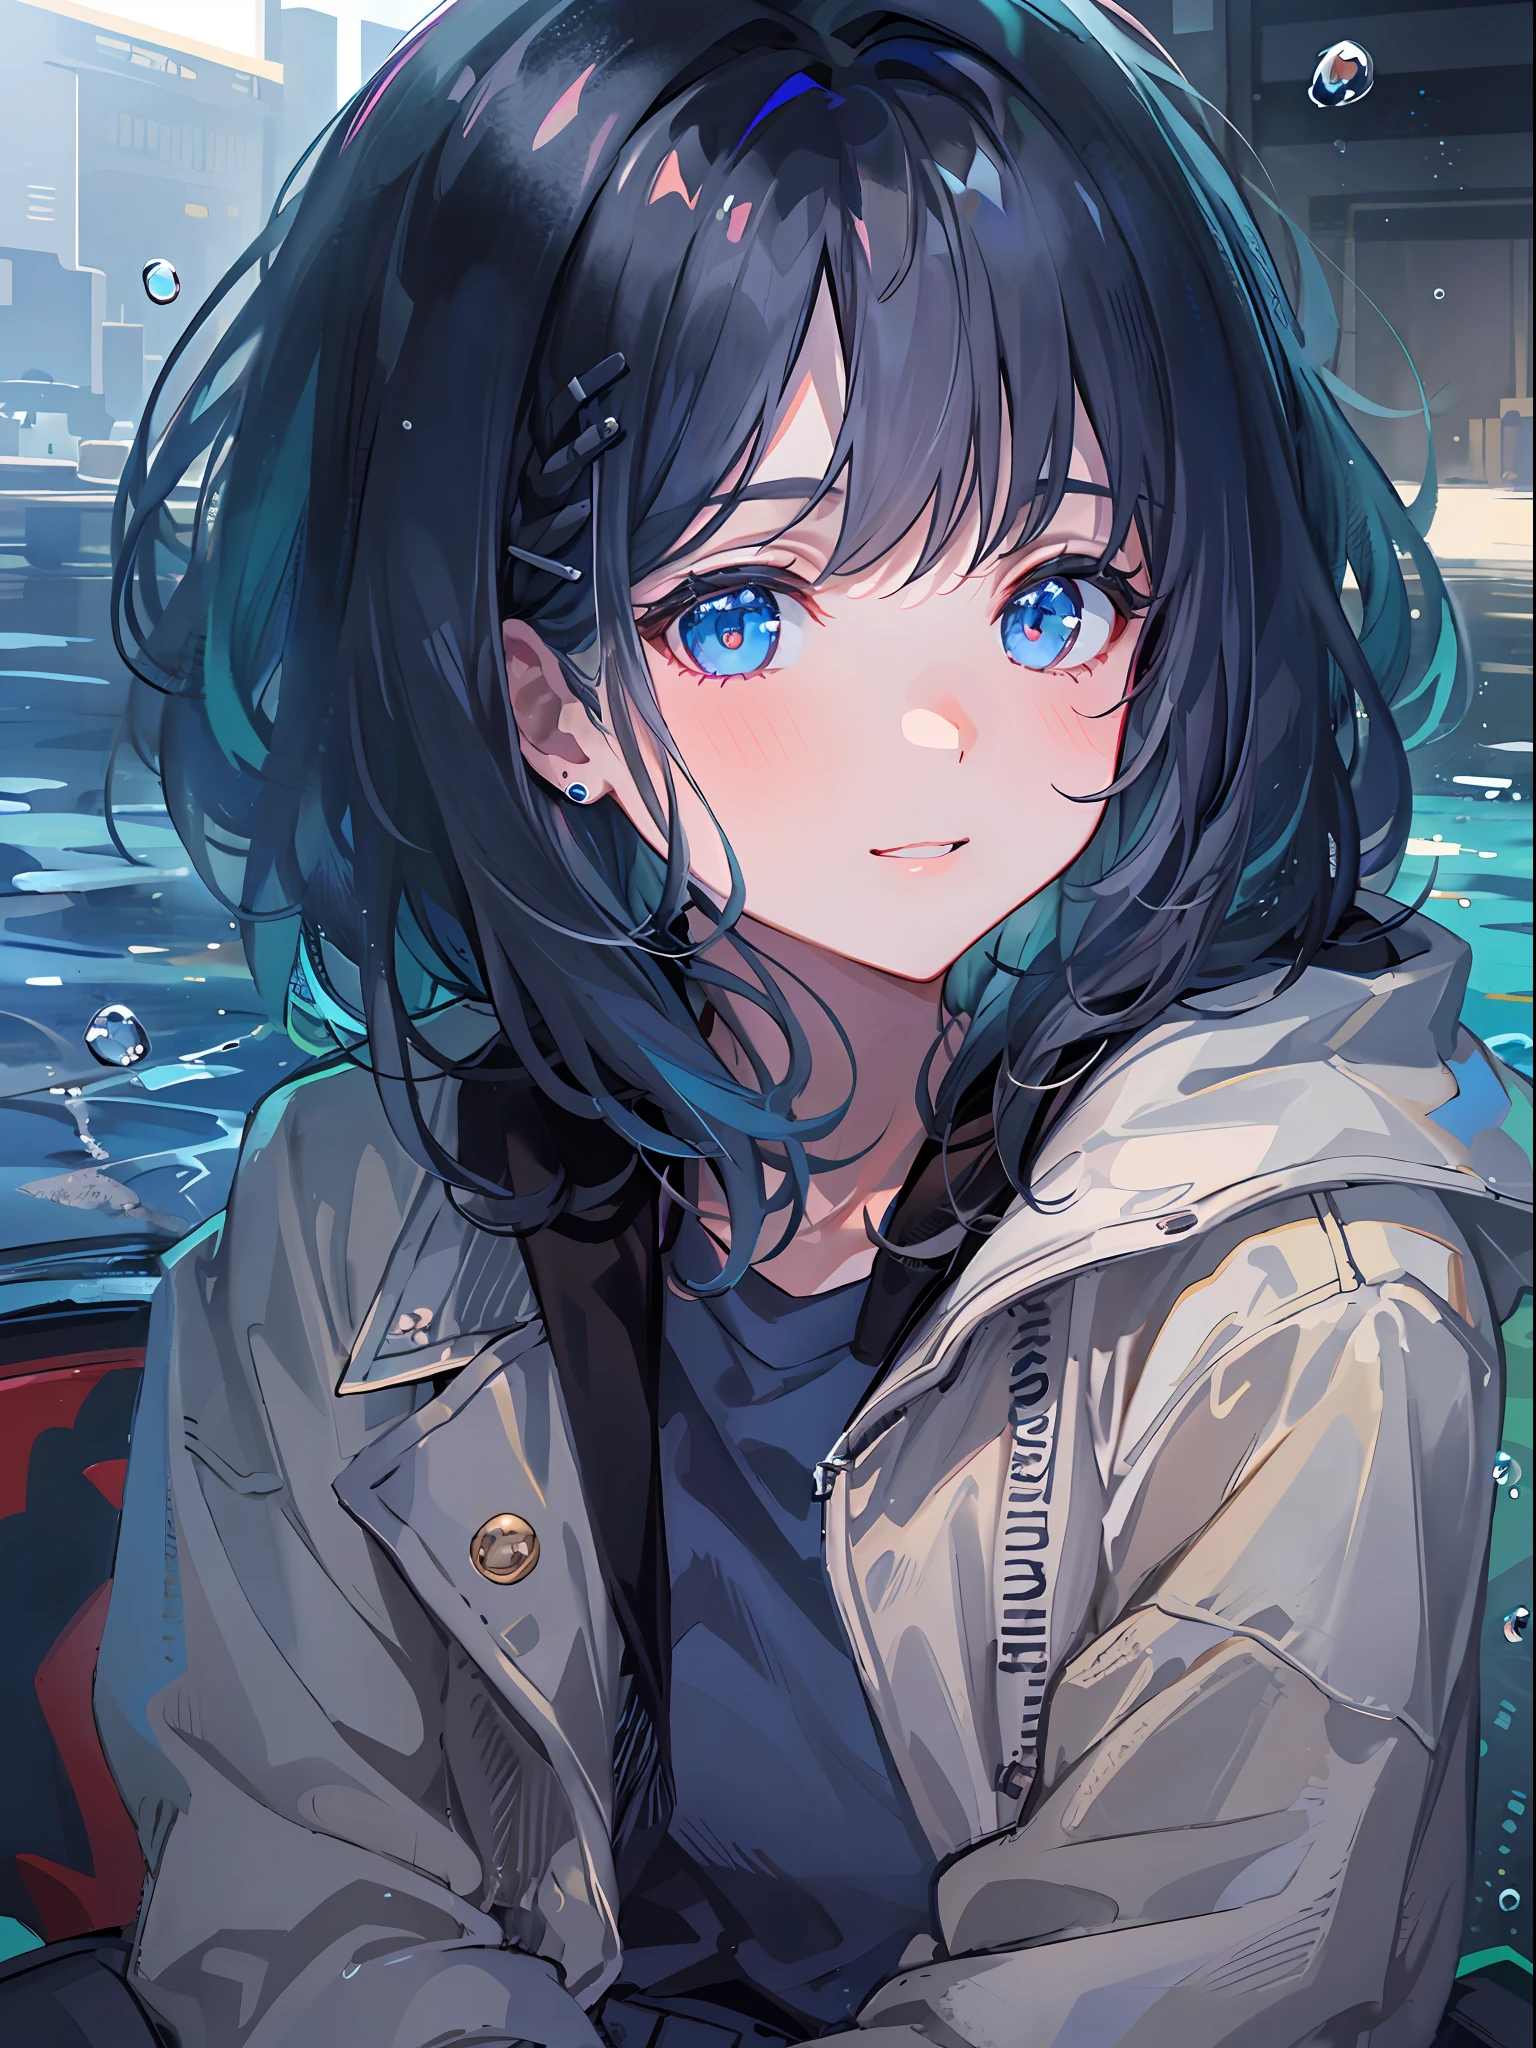 ((top-quality)), ((​masterpiece)), ((Ultra-detail)), (extremely delicate and beautiful), girl with, solo, cold attitude,((Black jacket)),She is very(relax)with  the(Settled down)Looks,A darK-haired, depth of fields,evil smile,Bubble, under the water, Air bubble,bright light blue eyes,Inner color with black hair and light blue tips,Cold background,Bob Hair - Linear Art, shortpants、knee high socks、Camisole inner shirt、Hands in pockets